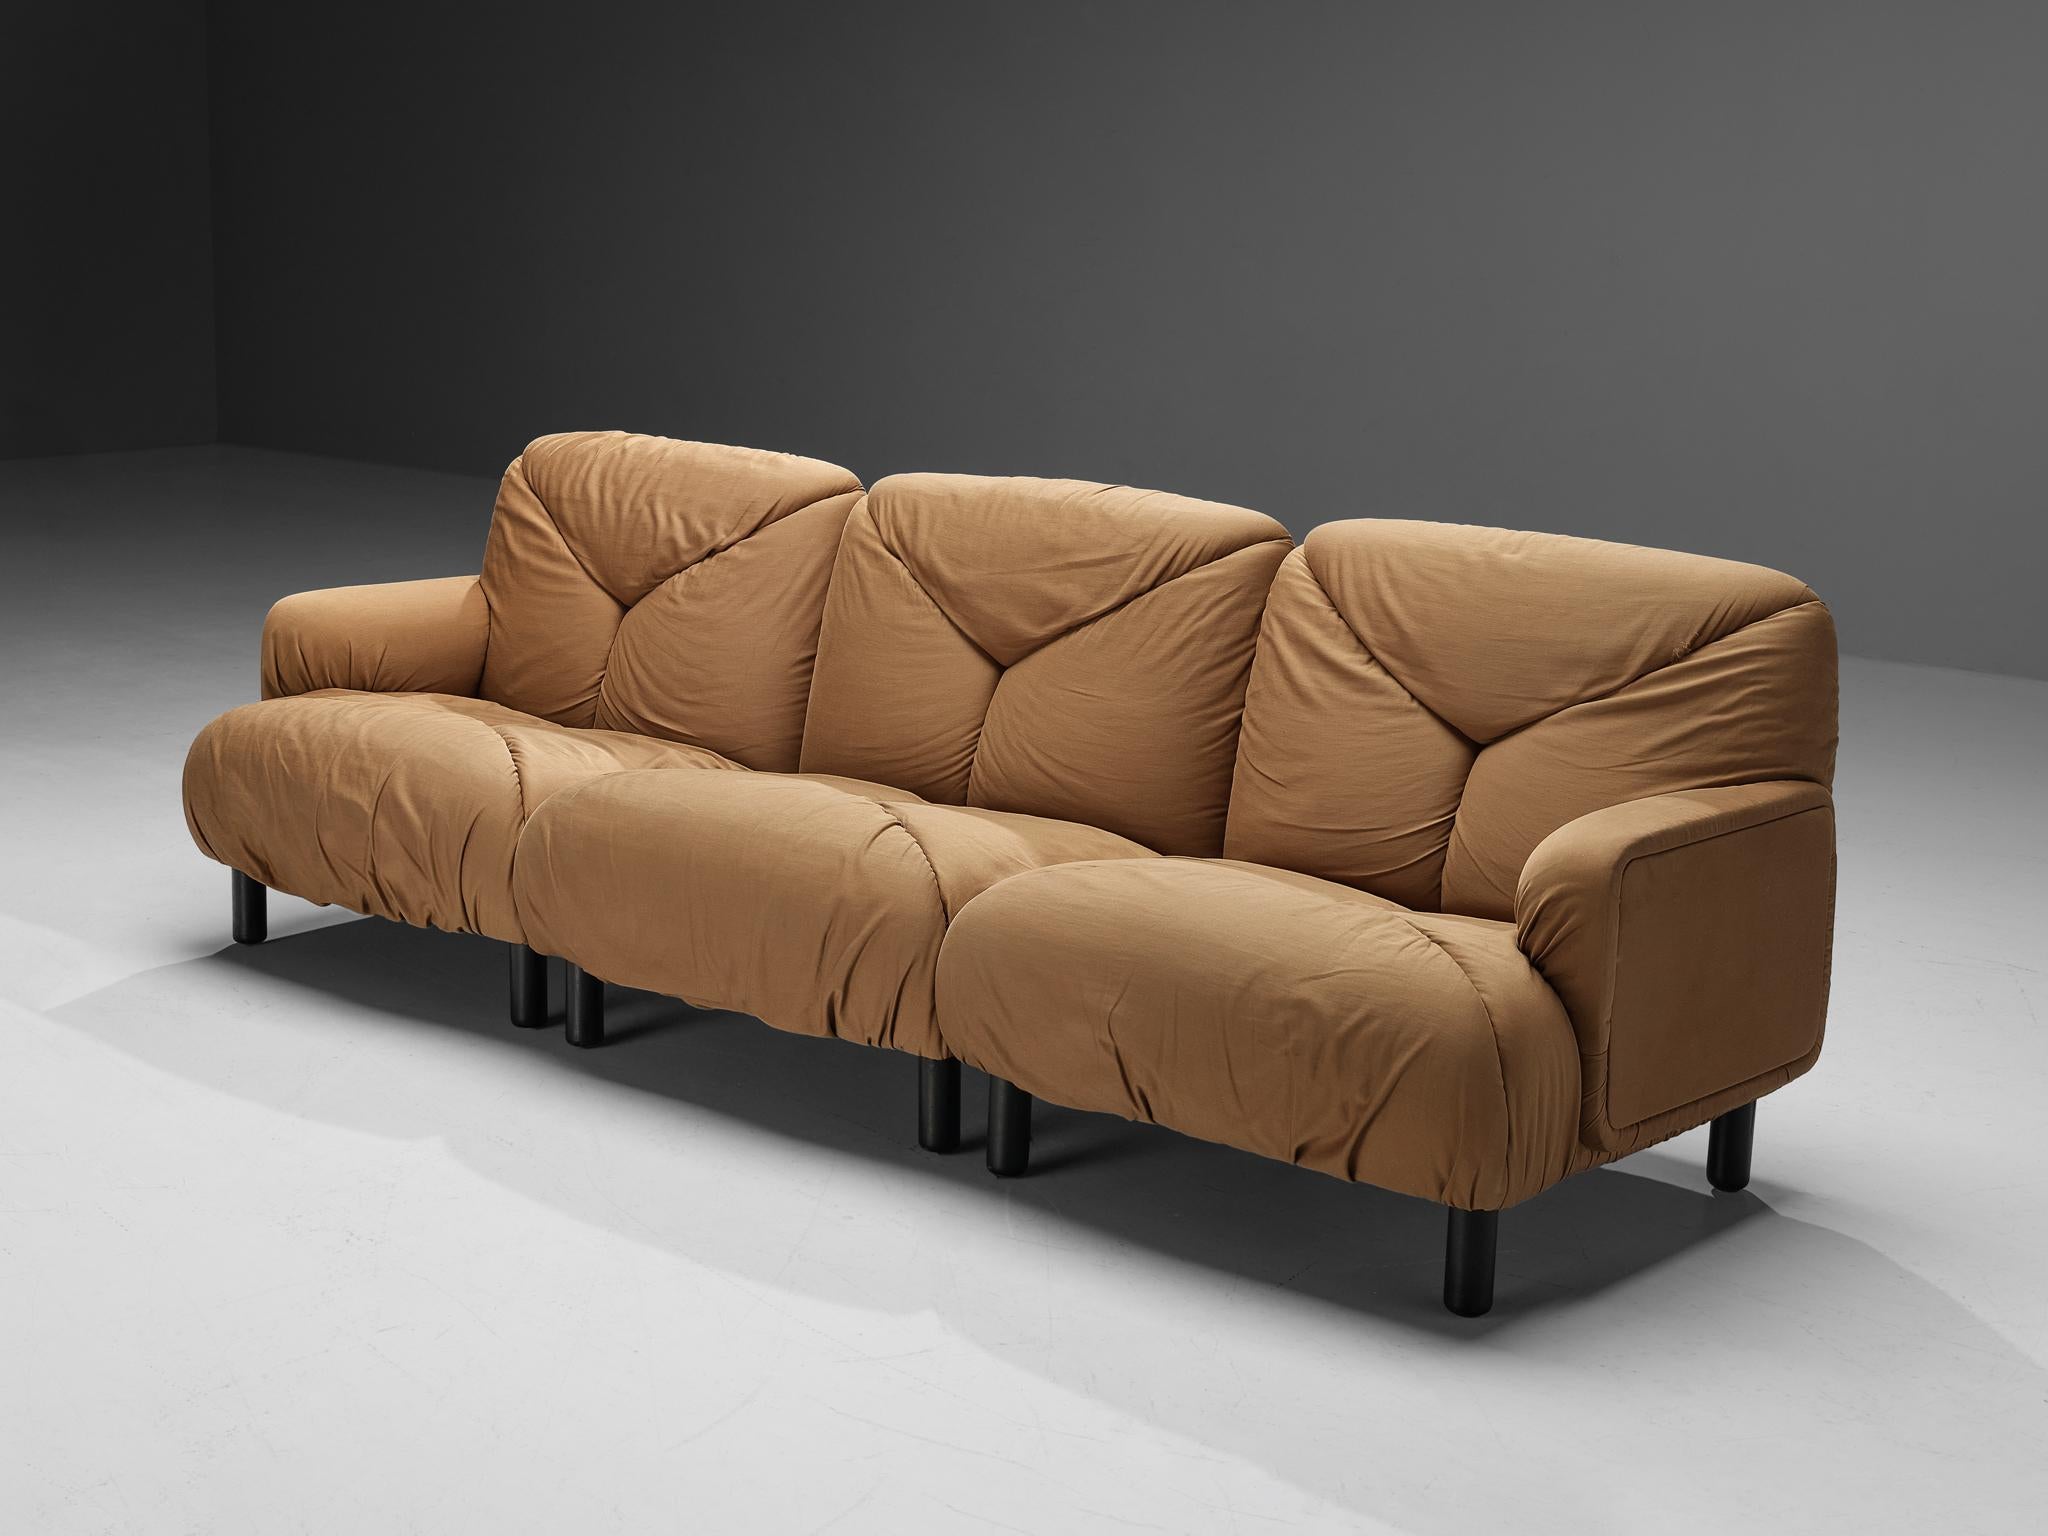 Vico Magistretti for ICF De Padova, ‘Davis’ sofa, wood, fabric, Italy, 1977

This distinctive sofa is designed by the innovative and renowned Italian designer Vico Magistretti (1920-2006). This three-seat sofa is well-designed featuring clear lines